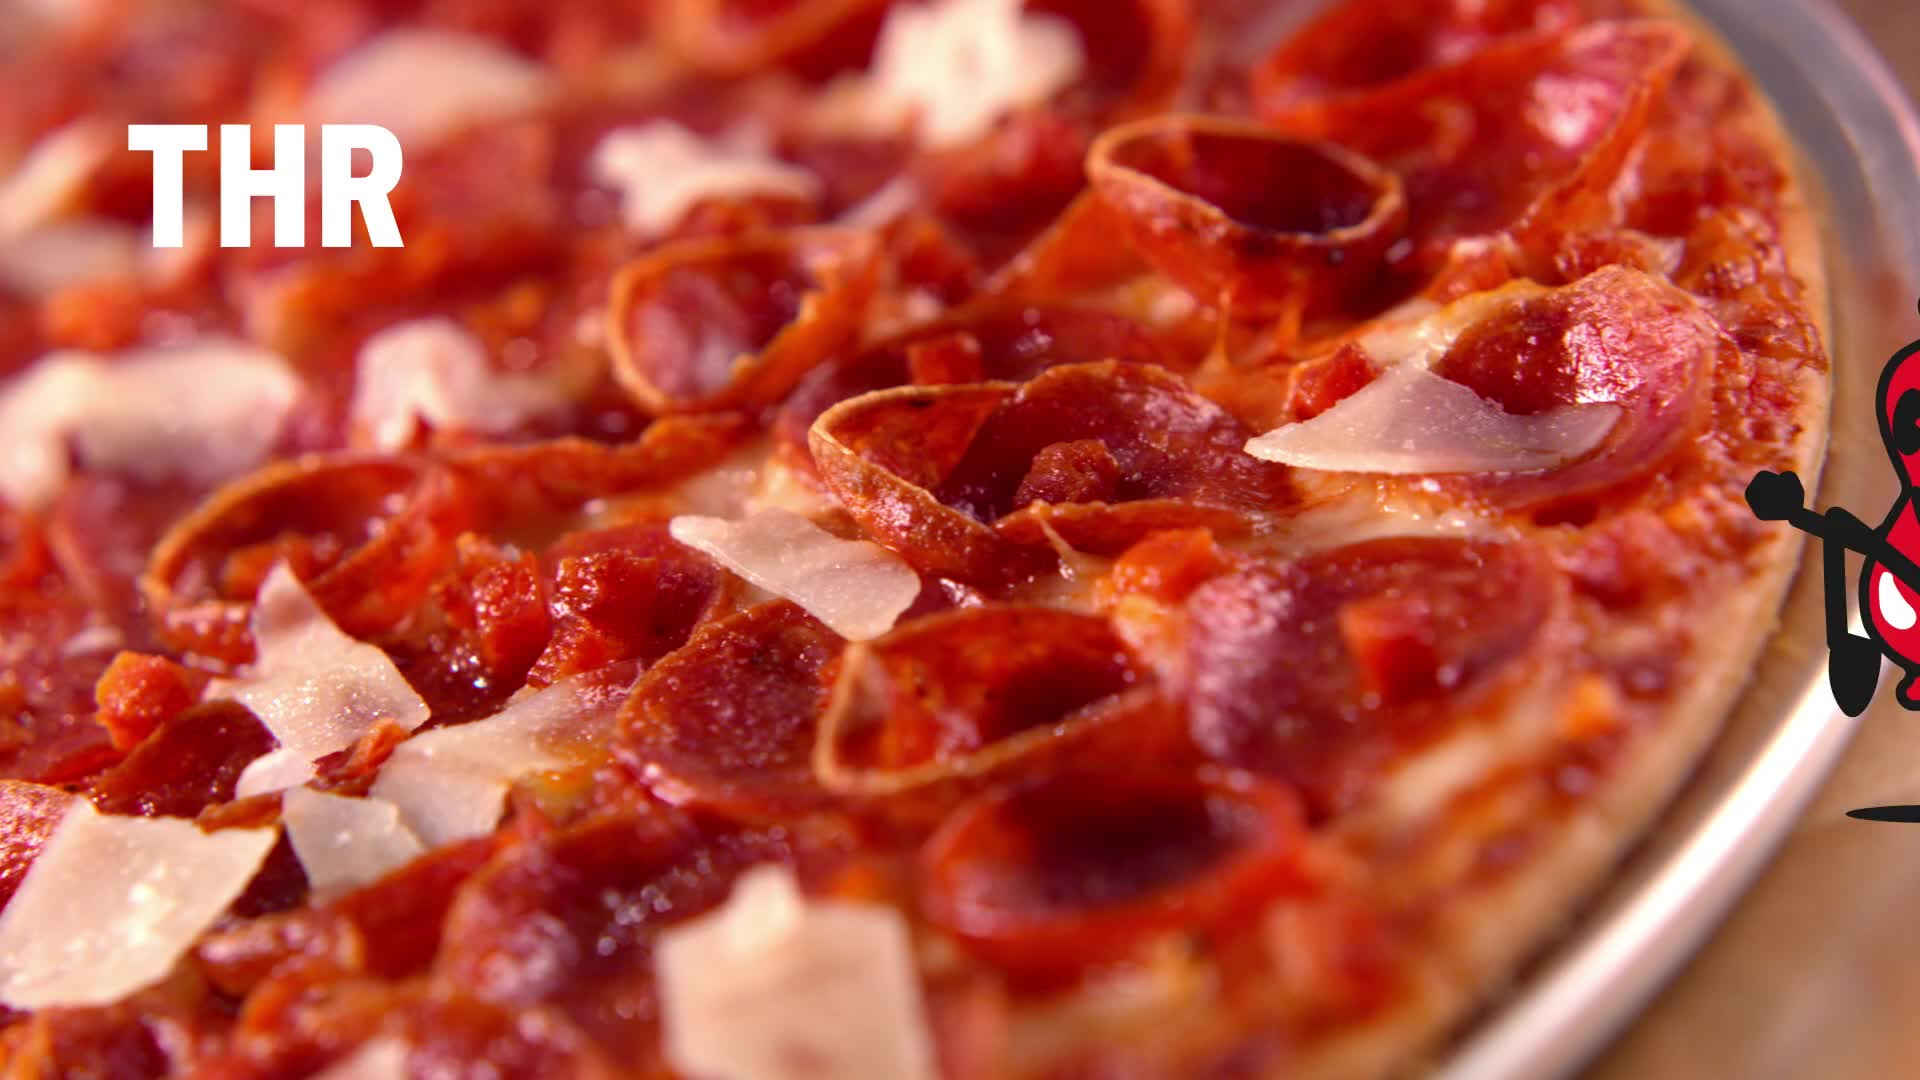 Donatos "Tre Pepperoni" - Every Piece Is Important Campaign (Agency: Fechtor)